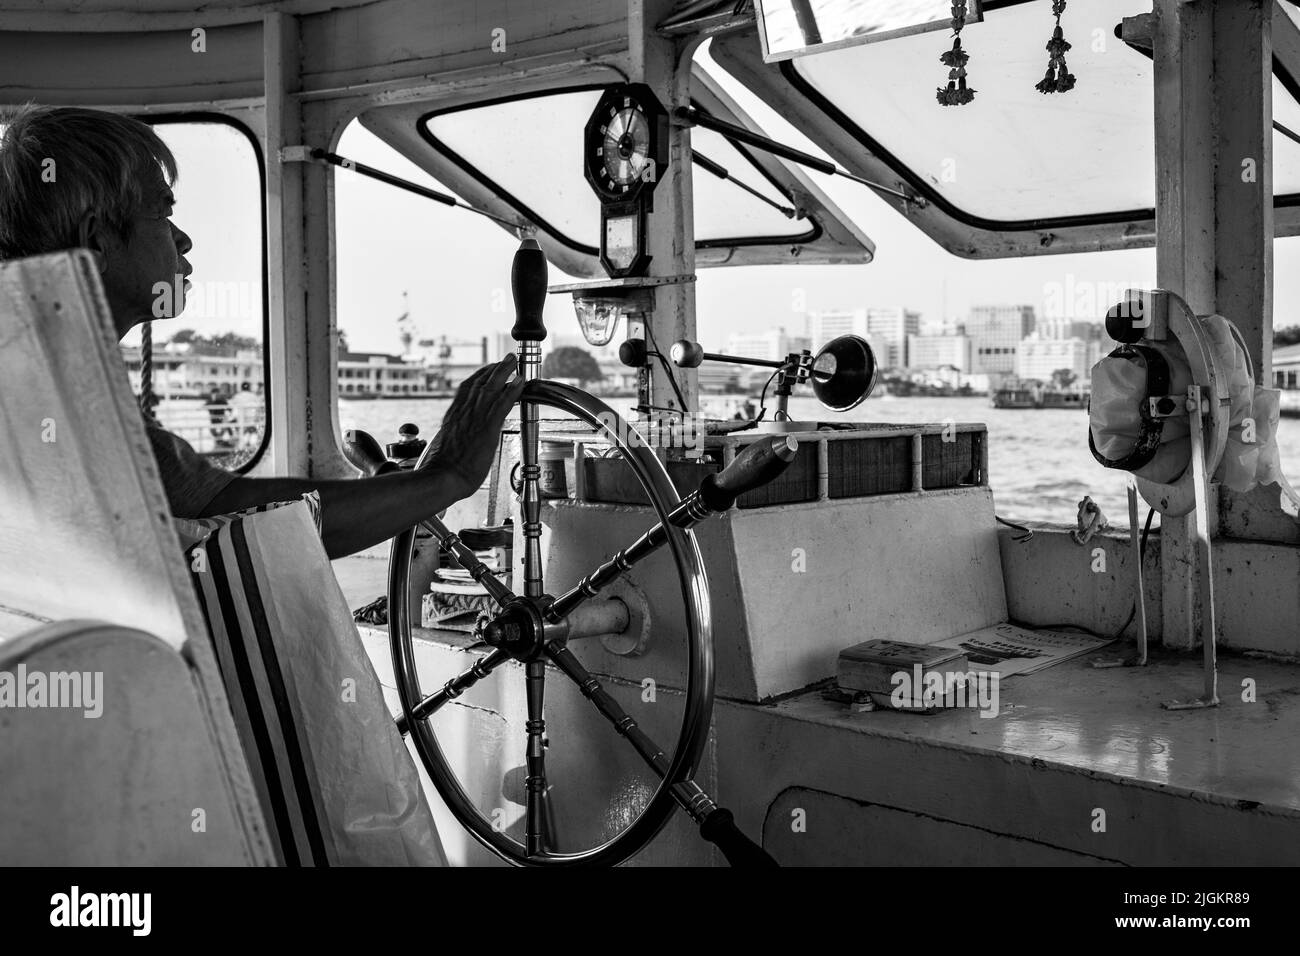 Bangkok, Thailand - December 11, 2009: Ferryman steers public ferry on the Chao Praya river in Bangkok. Black and white photography Stock Photo